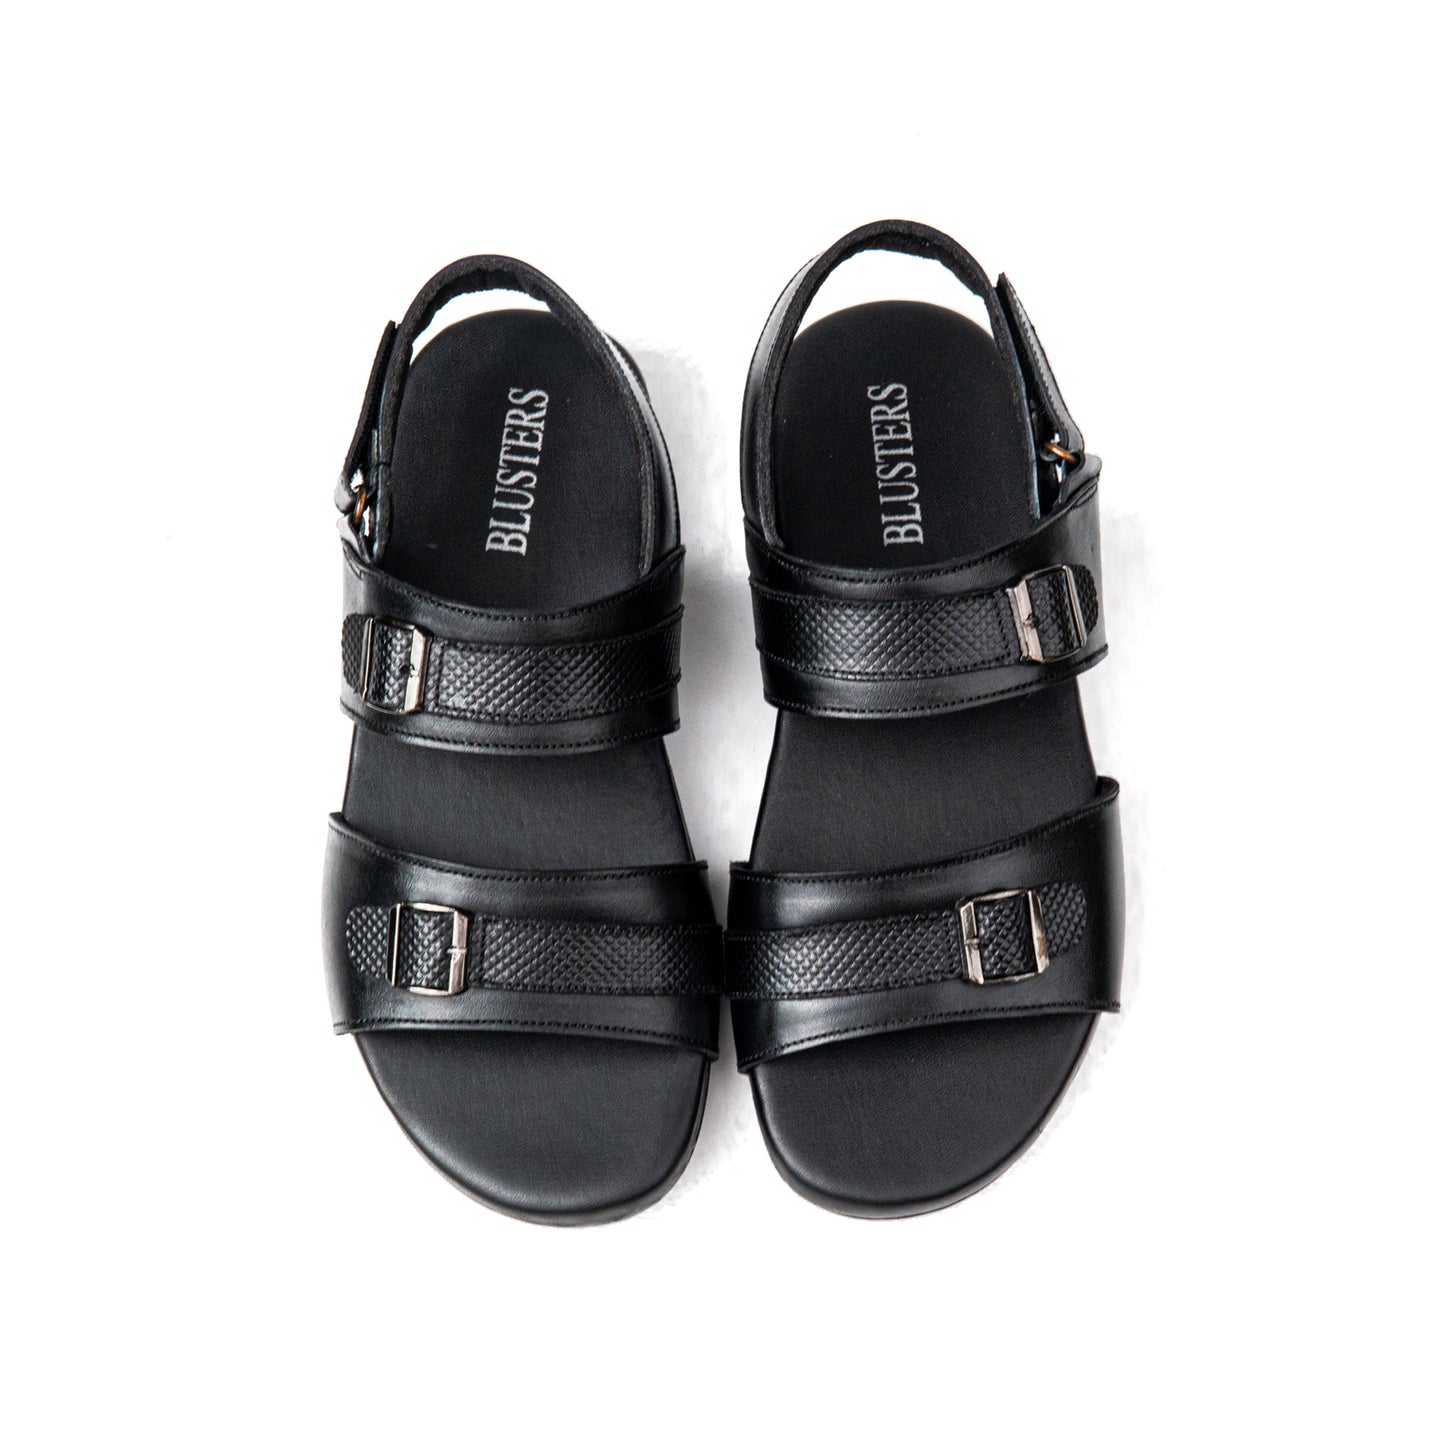 Dual Buckled Leather Sandals